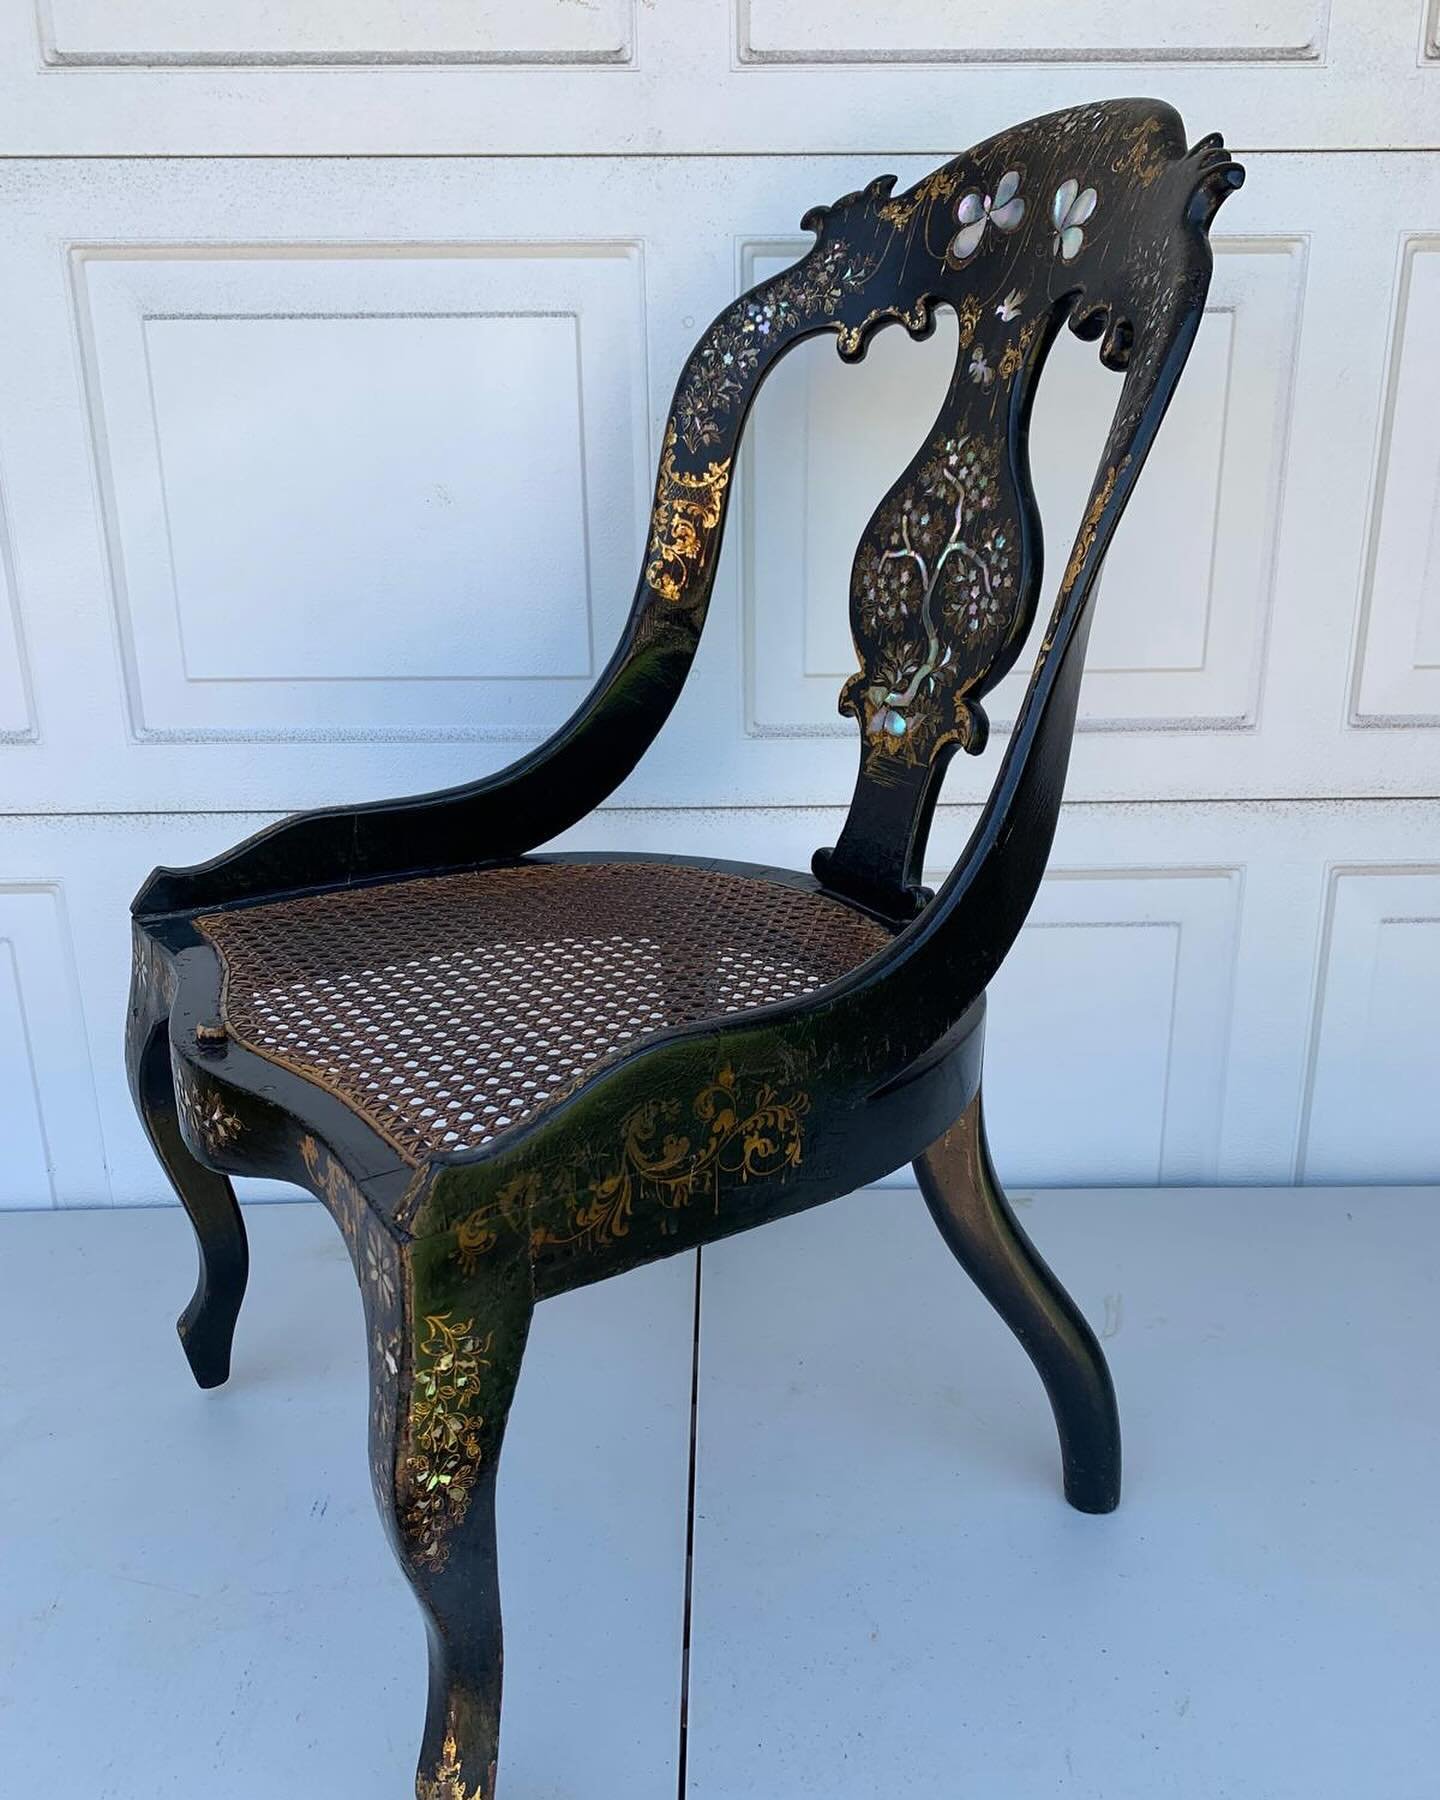 Majestic Antique Paper Mache Chair Inlaid with Mother of Pearl Butterflies 🦋🪑

English, Circa 1830-1860. Paper mache with mother of pearl inlay finished in gold leaf detail

A unique #CescaFinds 

Please DM for more information, or view along with 